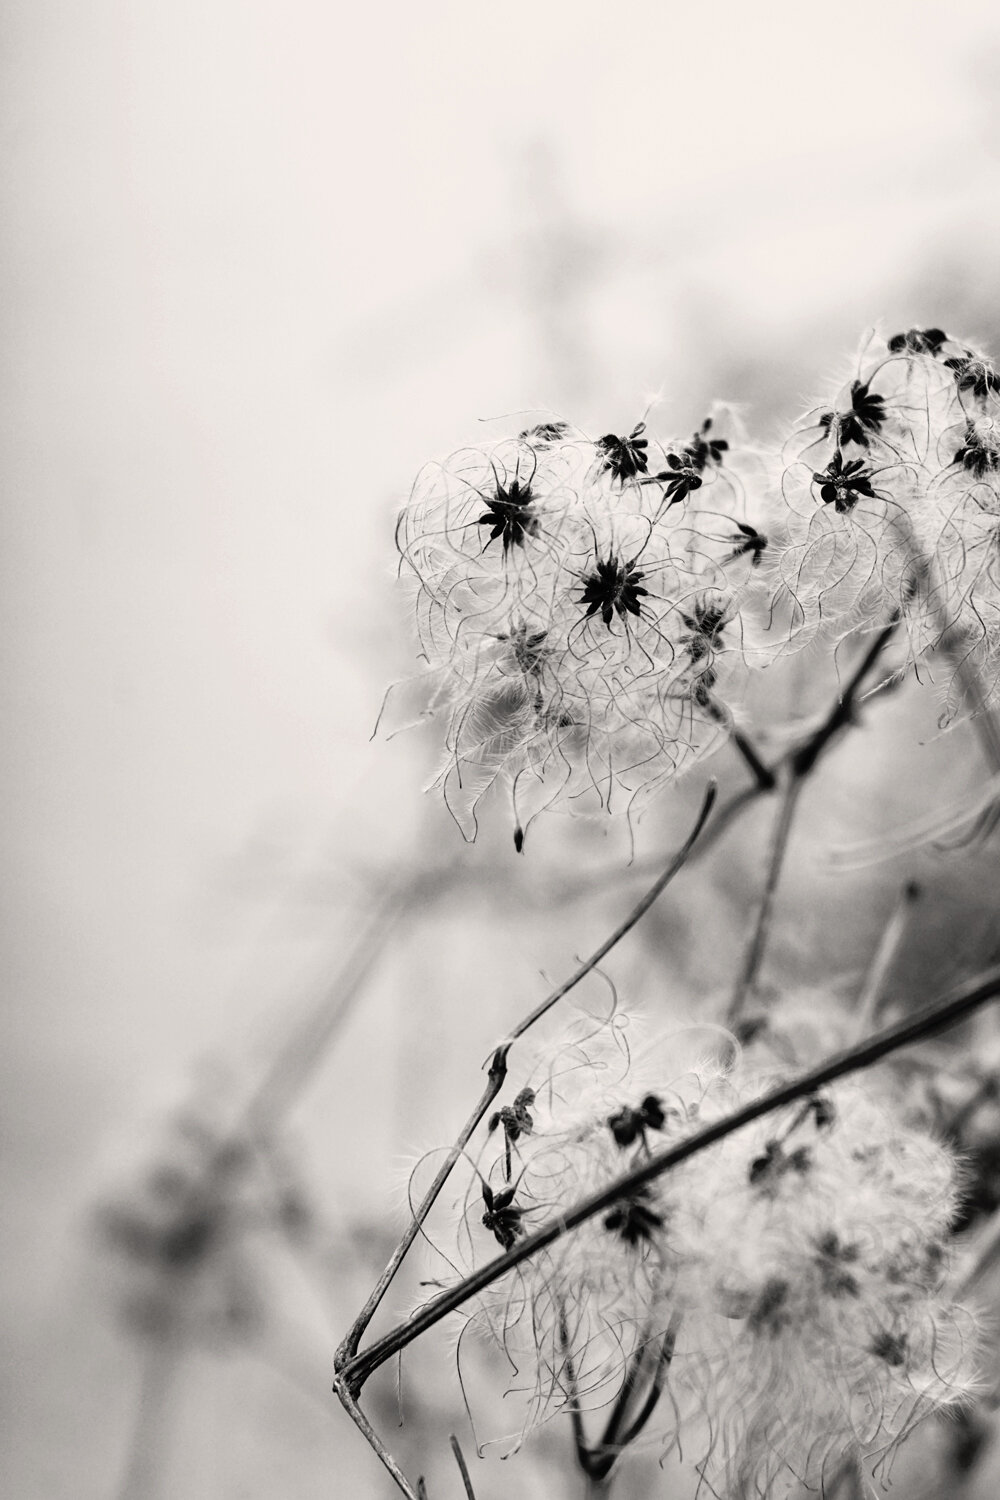 Daisies in winter